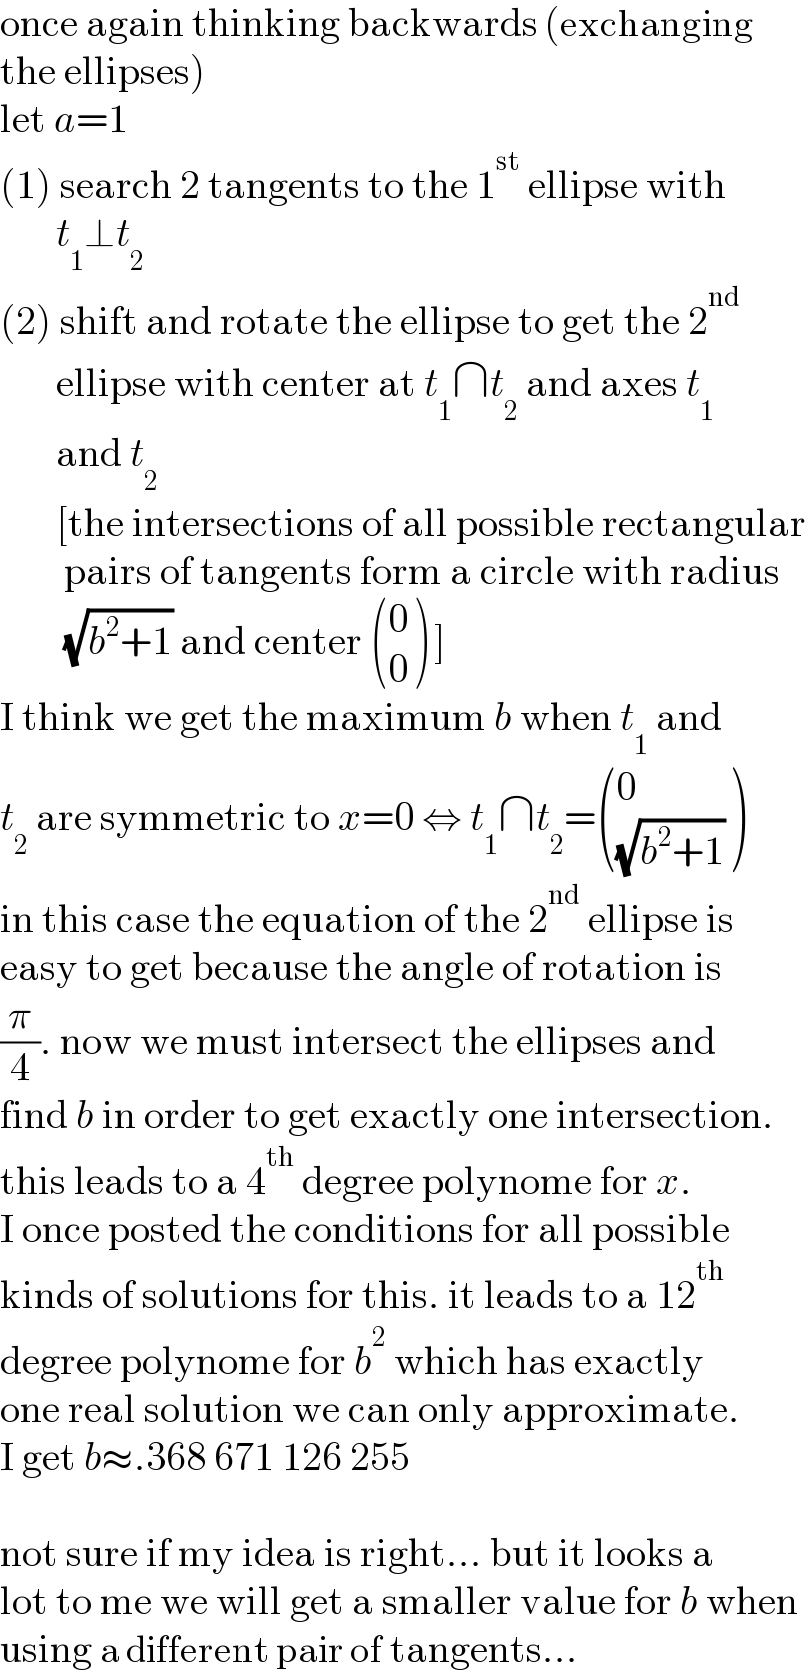 once again thinking backwards (exchanging  the ellipses)  let a=1  (1) search 2 tangents to the 1^(st)  ellipse with         t_1 ⊥t_2   (2) shift and rotate the ellipse to get the 2^(nd)          ellipse with center at t_1 ∩t_2  and axes t_1          and t_2          [the intersections of all possible rectangular          pairs of tangents form a circle with radius          (√(b^2 +1)) and center  ((0),(0) ) ]  I think we get the maximum b when t_1  and  t_2  are symmetric to x=0 ⇔ t_1 ∩t_2 = ((0),((√(b^2 +1))) )  in this case the equation of the 2^(nd)  ellipse is  easy to get because the angle of rotation is  (π/4). now we must intersect the ellipses and  find b in order to get exactly one intersection.  this leads to a 4^(th)  degree polynome for x.  I once posted the conditions for all possible  kinds of solutions for this. it leads to a 12^(th)   degree polynome for b^2  which has exactly  one real solution we can only approximate.  I get b≈.368 671 126 255    not sure if my idea is right... but it looks a  lot to me we will get a smaller value for b when  using a different pair of tangents...  